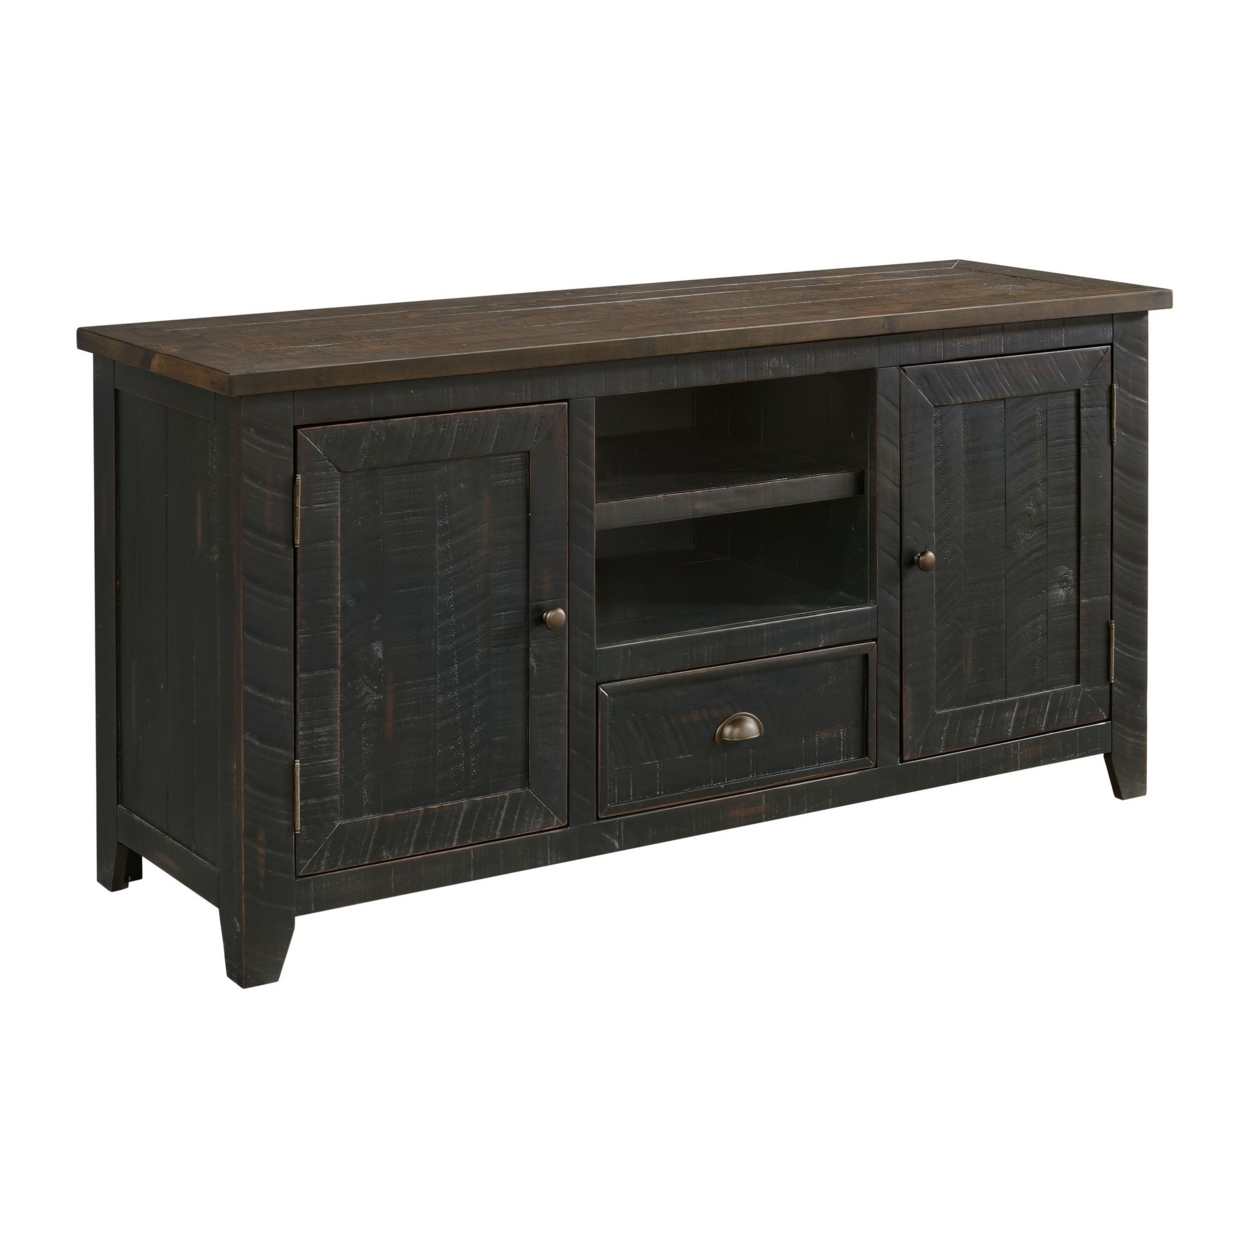 TV Stand With 2 Cabinets And 2 Cubbies, Black And Brown- Saltoro Sherpi